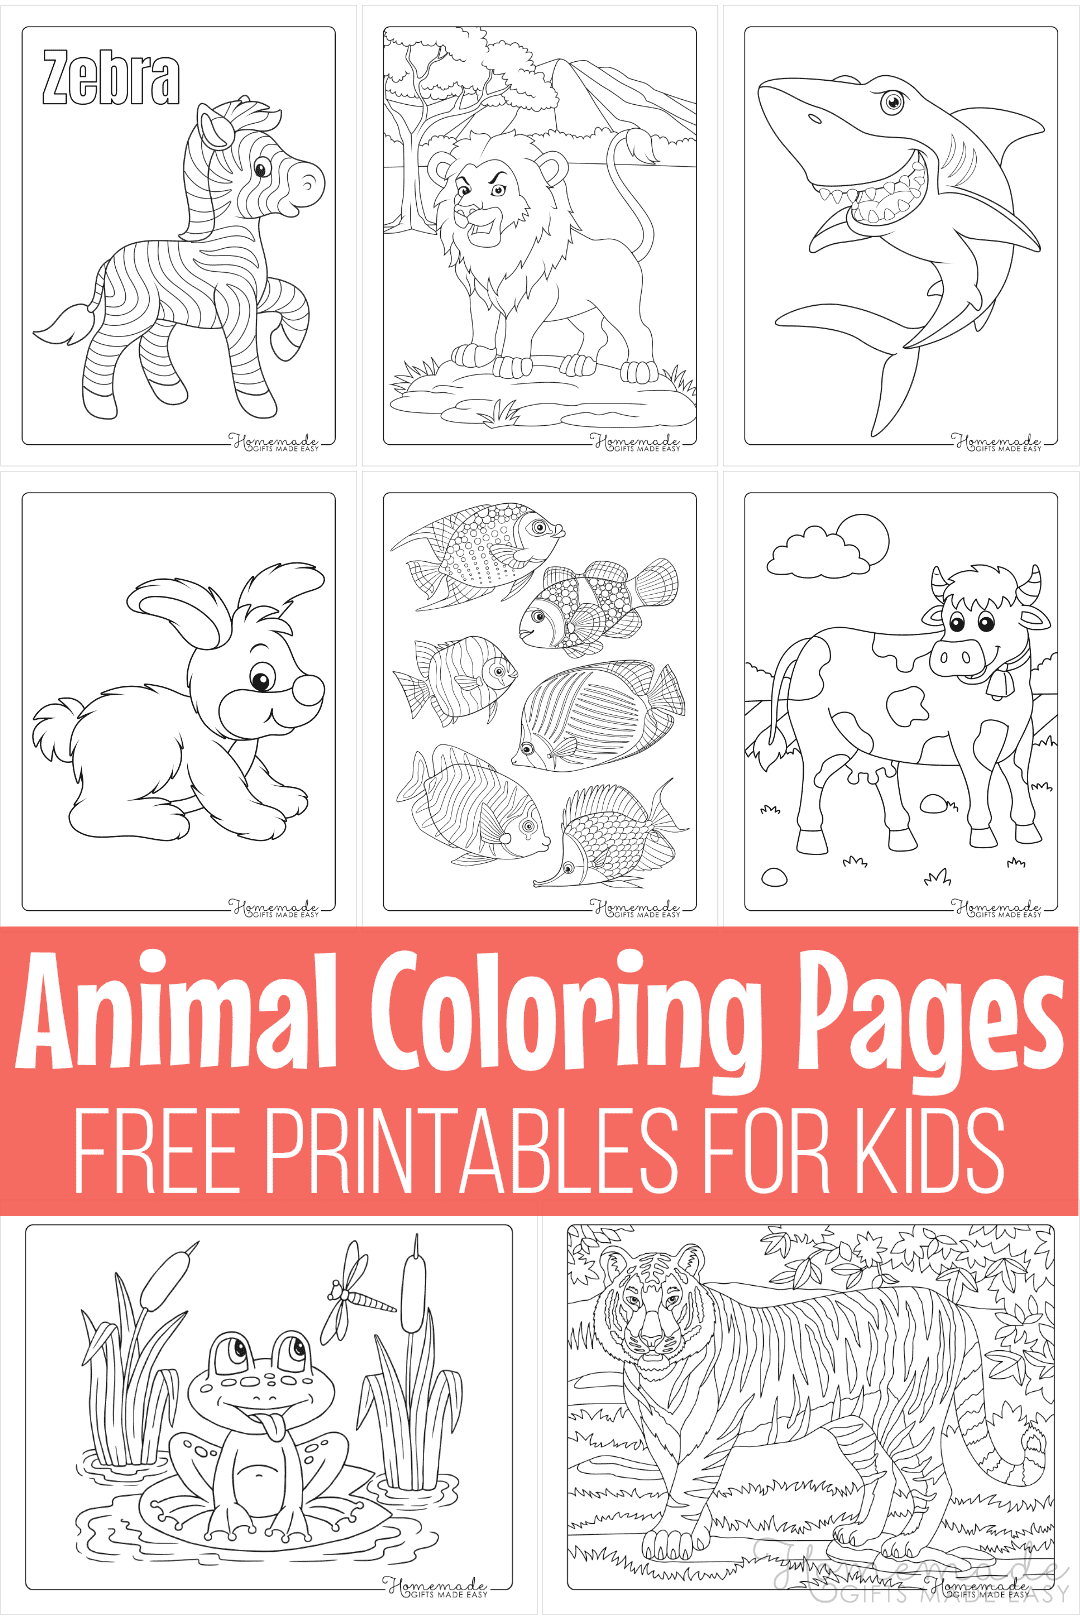 Cats Coloring Book Pdf Images - Free Download on Freepik